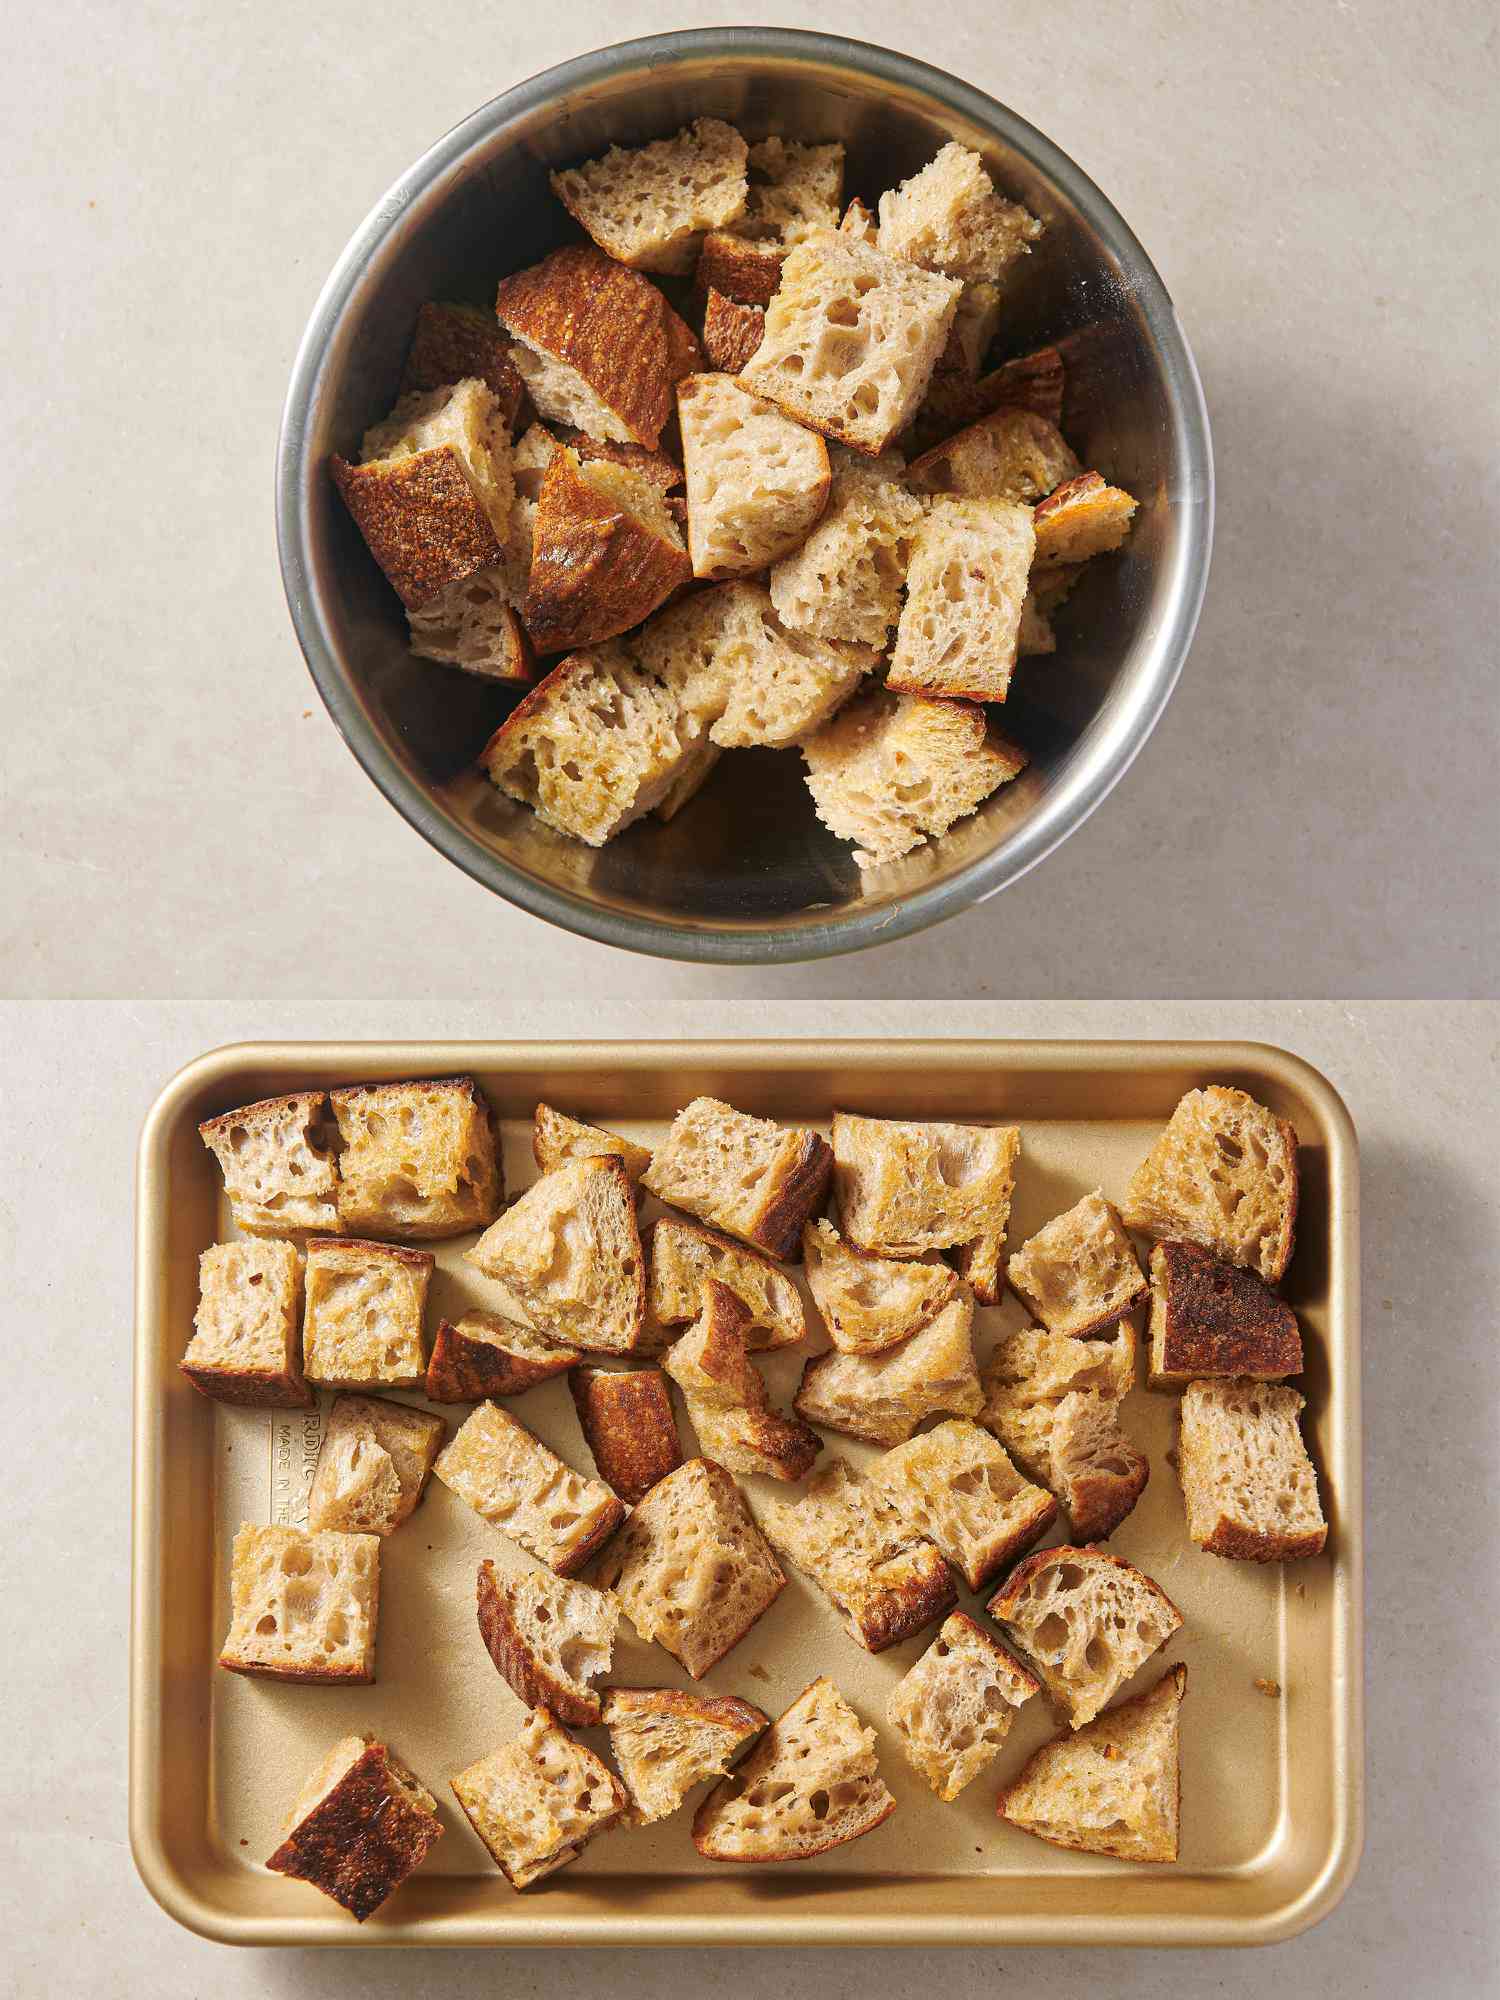 Bread cubes tossed with olive oil inside a large bowl, and crisp bread cubes on rimmed baking sheet